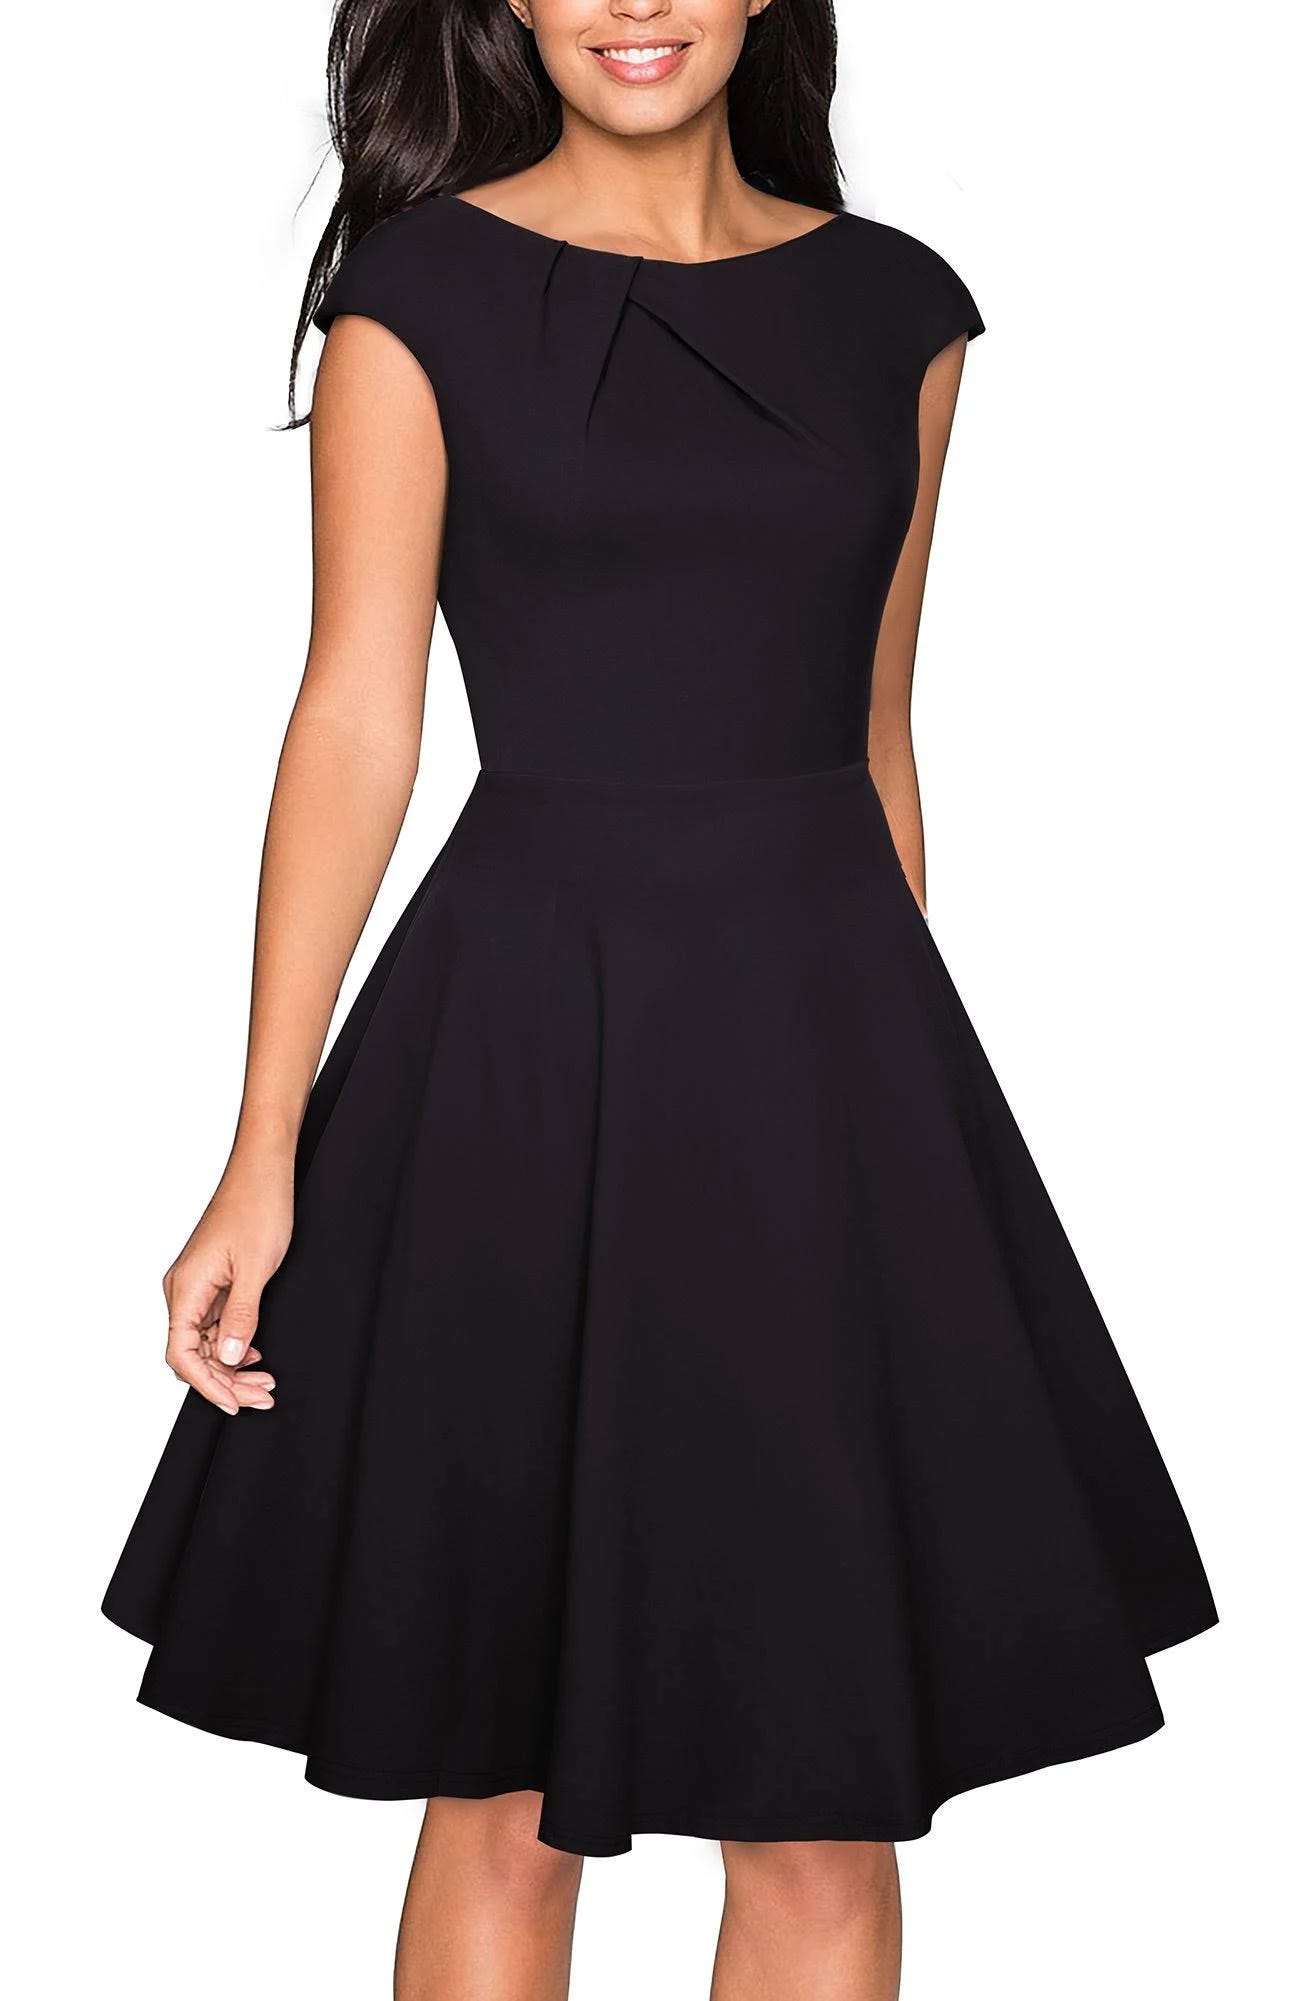 Vintage Scoop Neck Party Flare Dress - Casual and Versatile for Any Occasion | Image